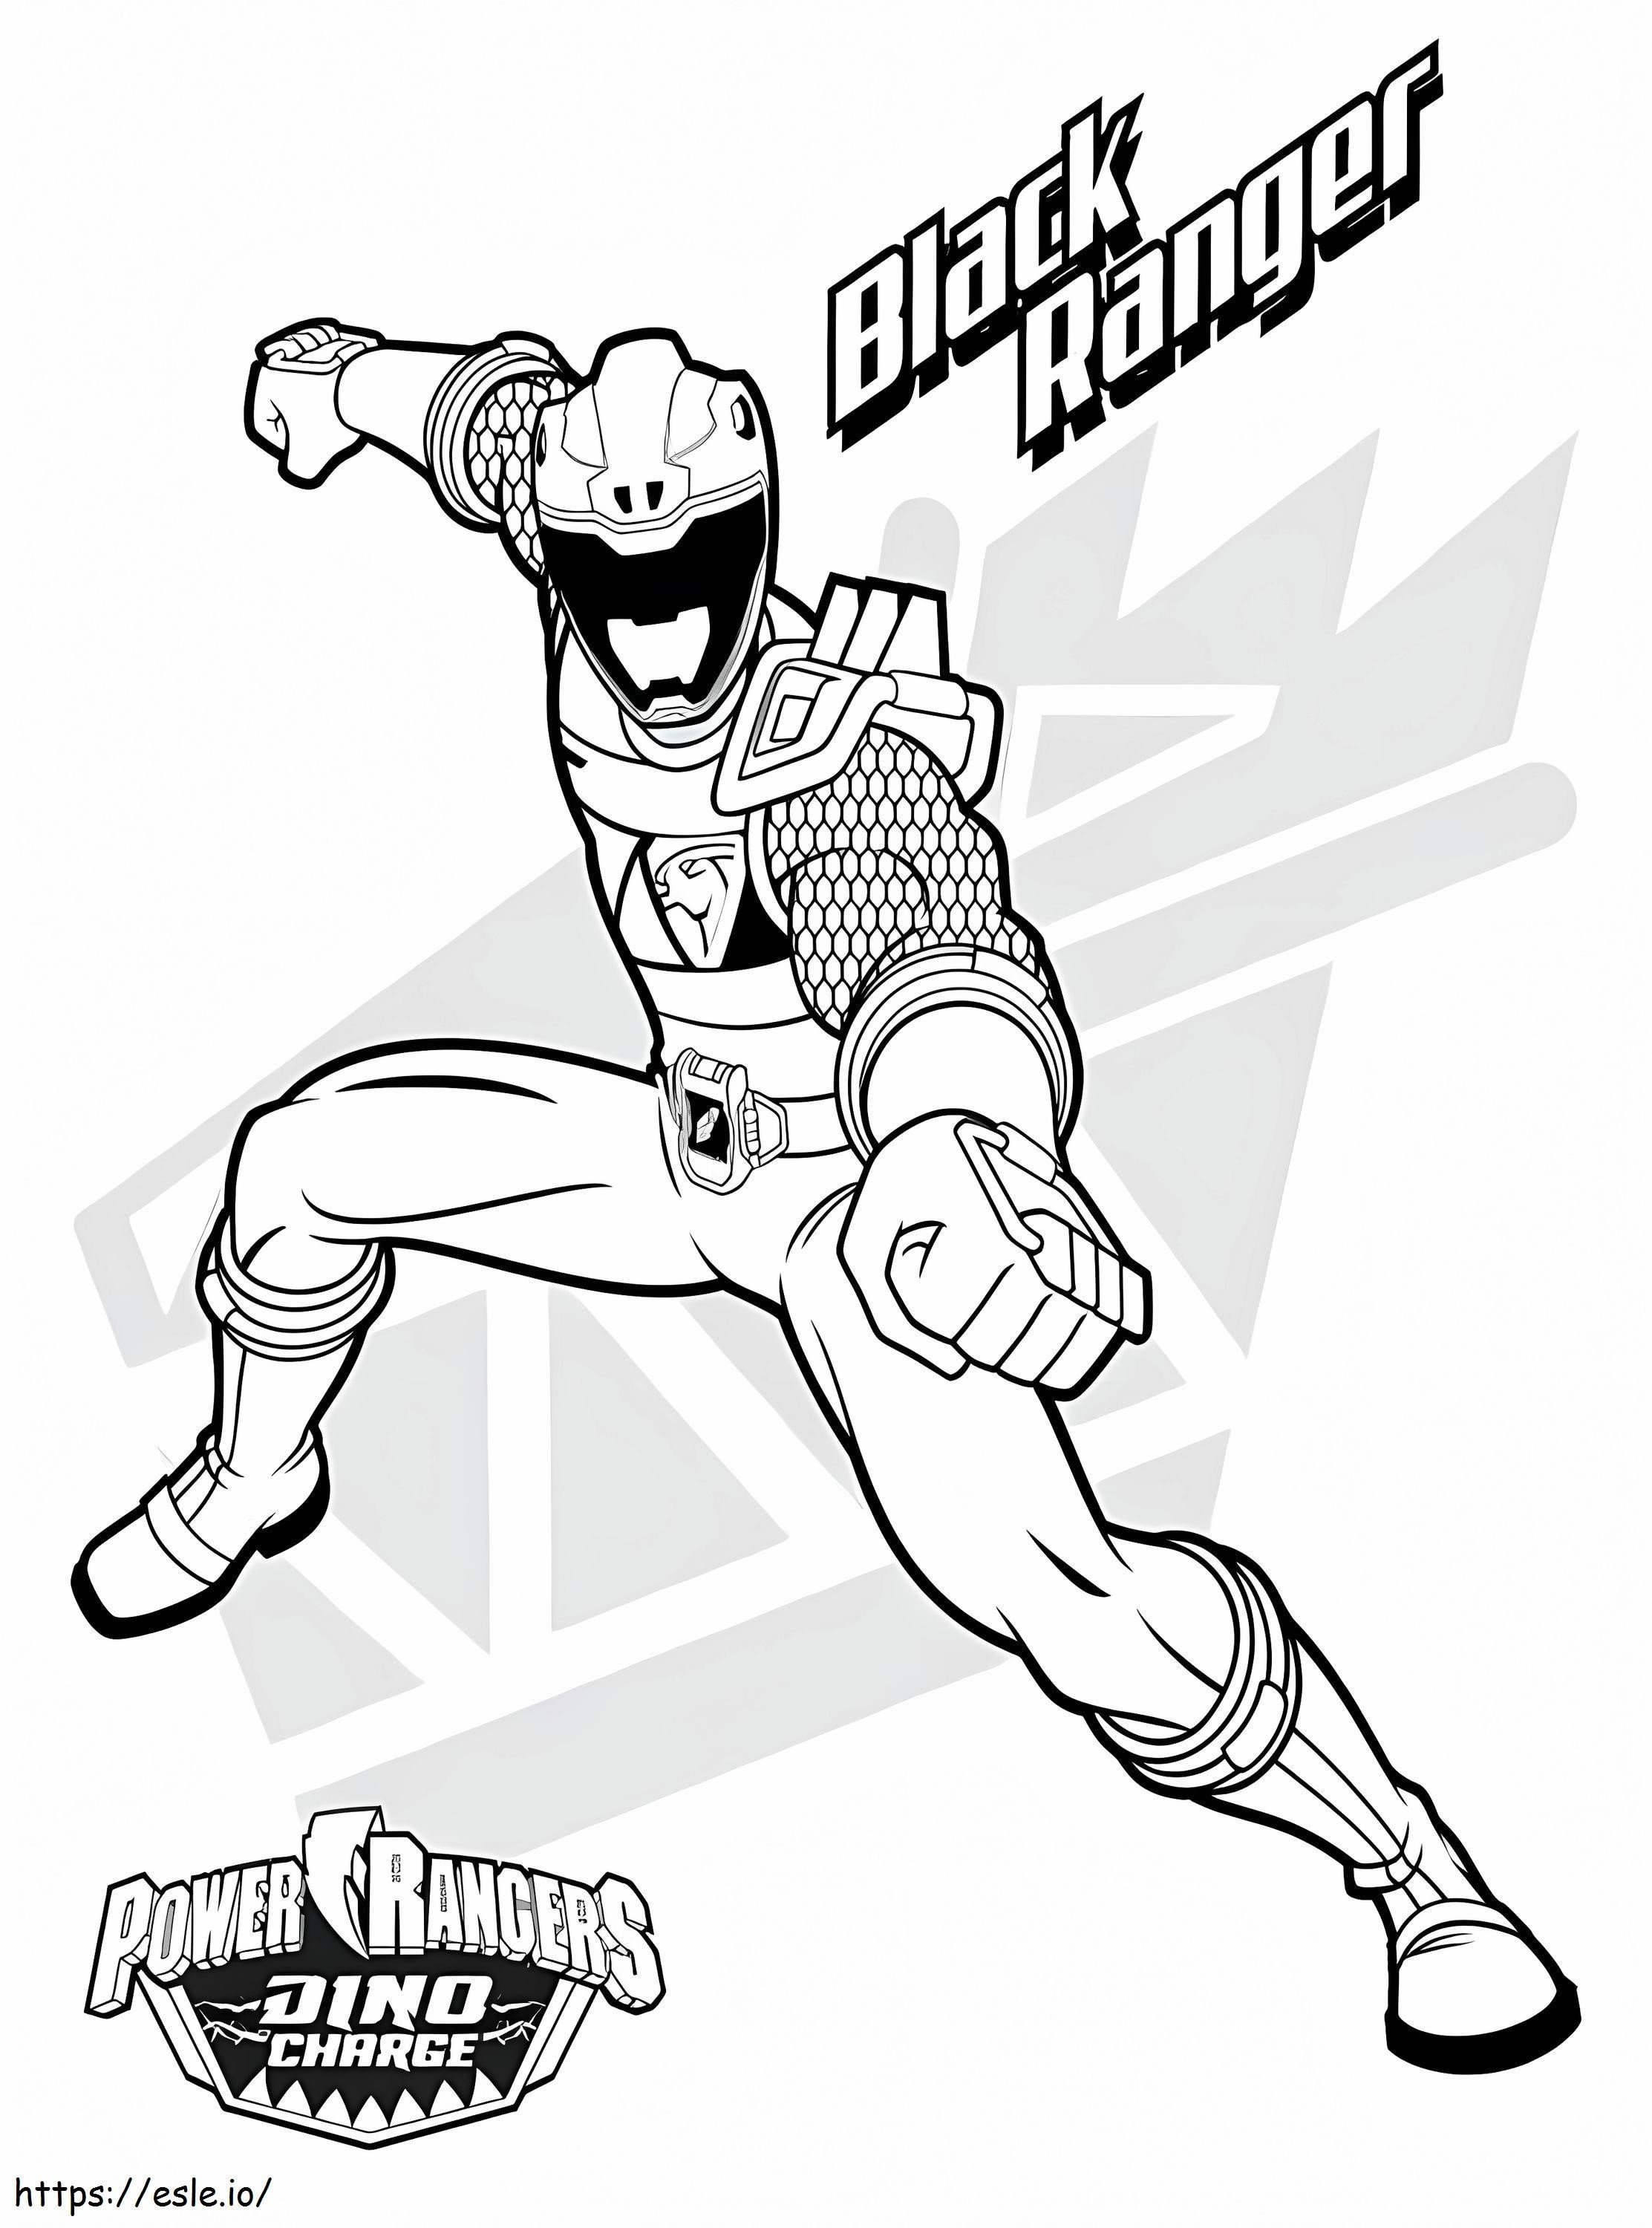 Power Rangers 3 coloring page